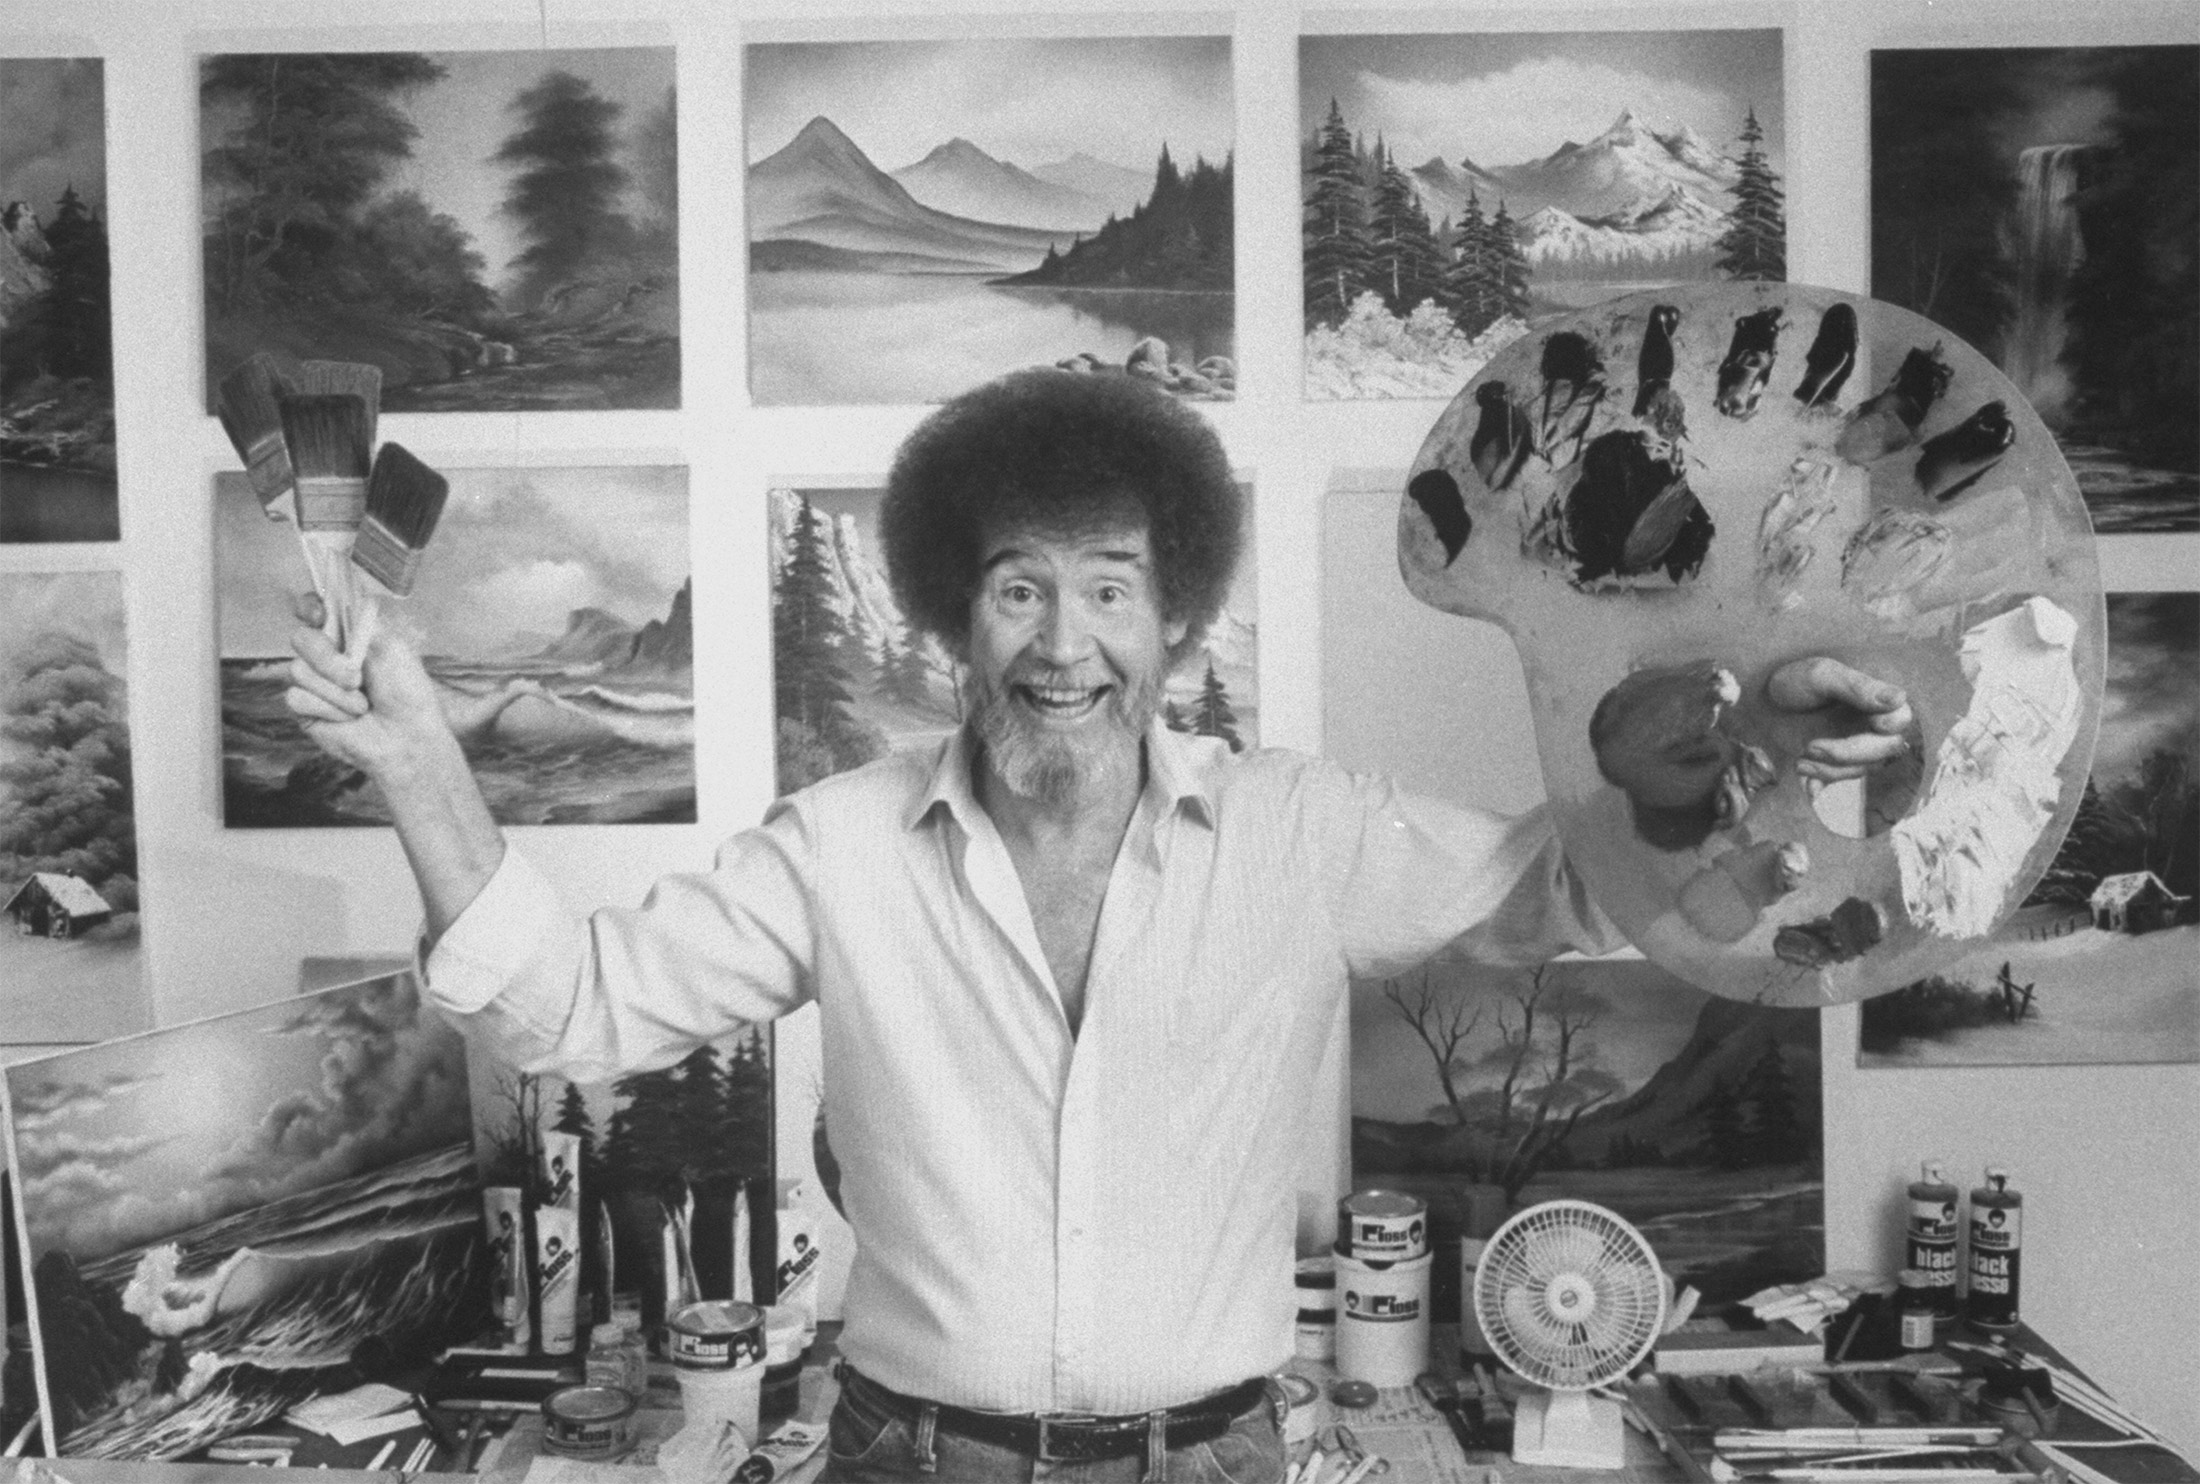 bob-ross-company-settles-suit-over-beautiful-mountain-shirt-bloomberg